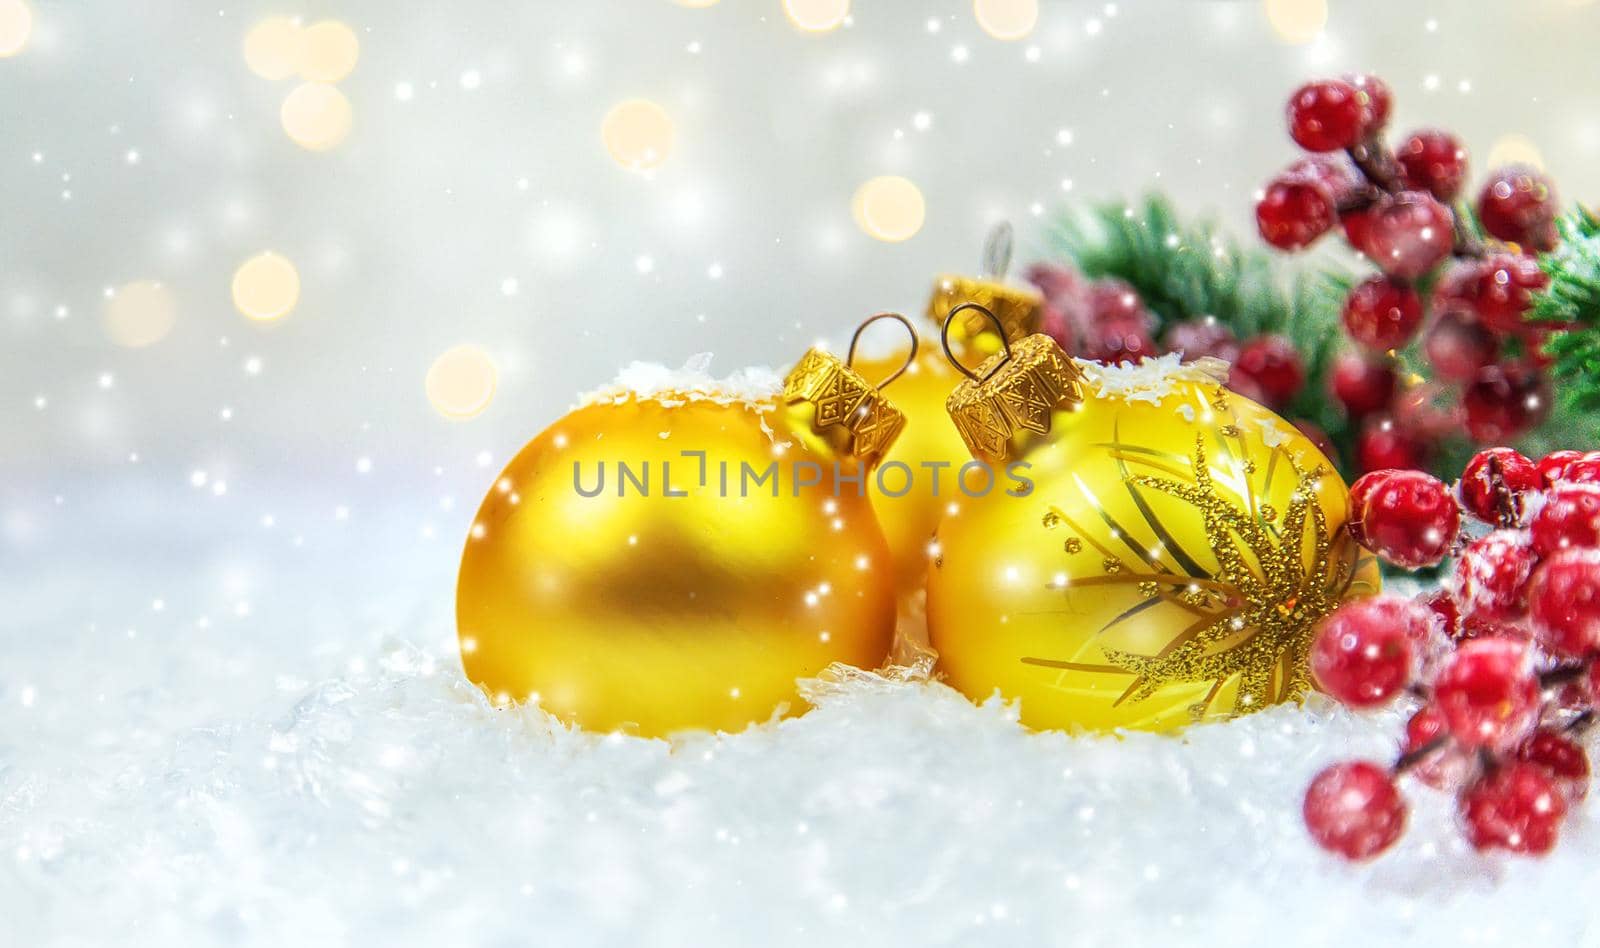 Christmas cards with snow and decor. Selective focus. by yanadjana